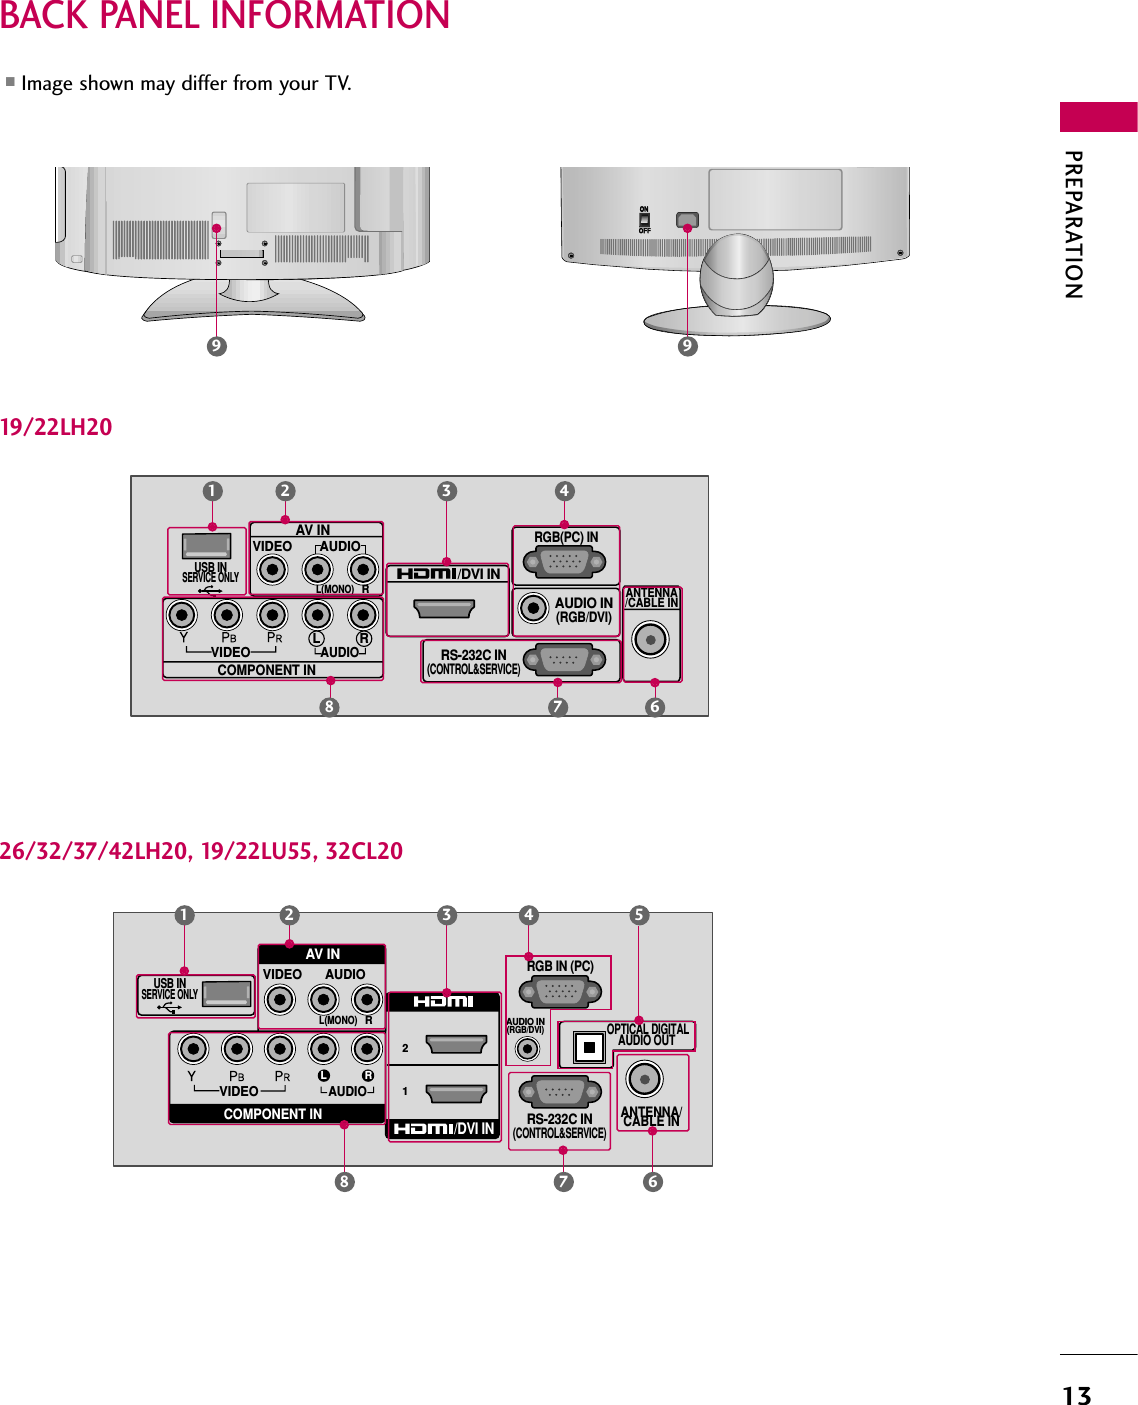 PREPARATION13BACK PANEL INFORMATIONRS-232C IN(CONTROL&amp;SERVICE)AUDIO IN(RGB/DVI)ANTENNA/CABLE INVIDEOAUDIOL RRGB(PC) IN/DVI INAV INVIDEO AUDIOL(MONO)RCOMPONENT INUSB INSERVICE ONLY21 43USB INSERVICE ONLYRS-232C IN(CONTROL&amp;SERVICE)AUDIO IN(RGB/DVI)ANTENNA/CABLE INVIDEOAUDIORGB IN (PC)VIDEO AUDIOL(MONO)R21L ROPTICAL DIGITALAUDIO OUT /DVI INCOMPONENT INAV IN21326/32/37/42LH20, 19/22LU55, 32CL2019/22LH20457 687 689❖◆❖◆❖❋❋❖❋❋9■Image shown may differ from your TV.